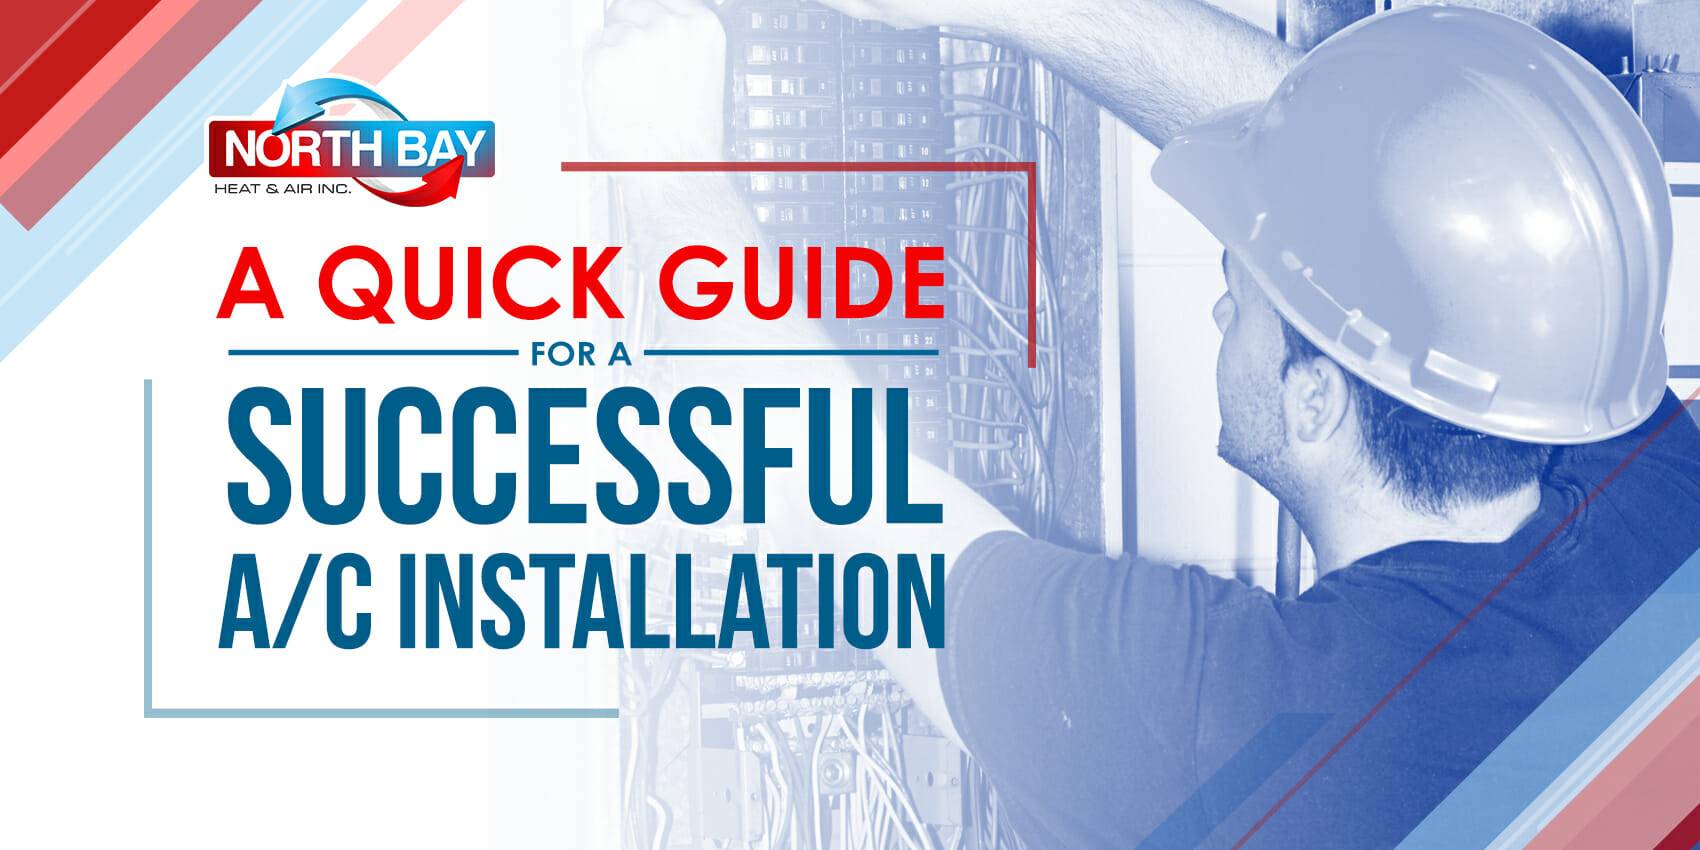 A Quick Guide For a Successful A/C Installation